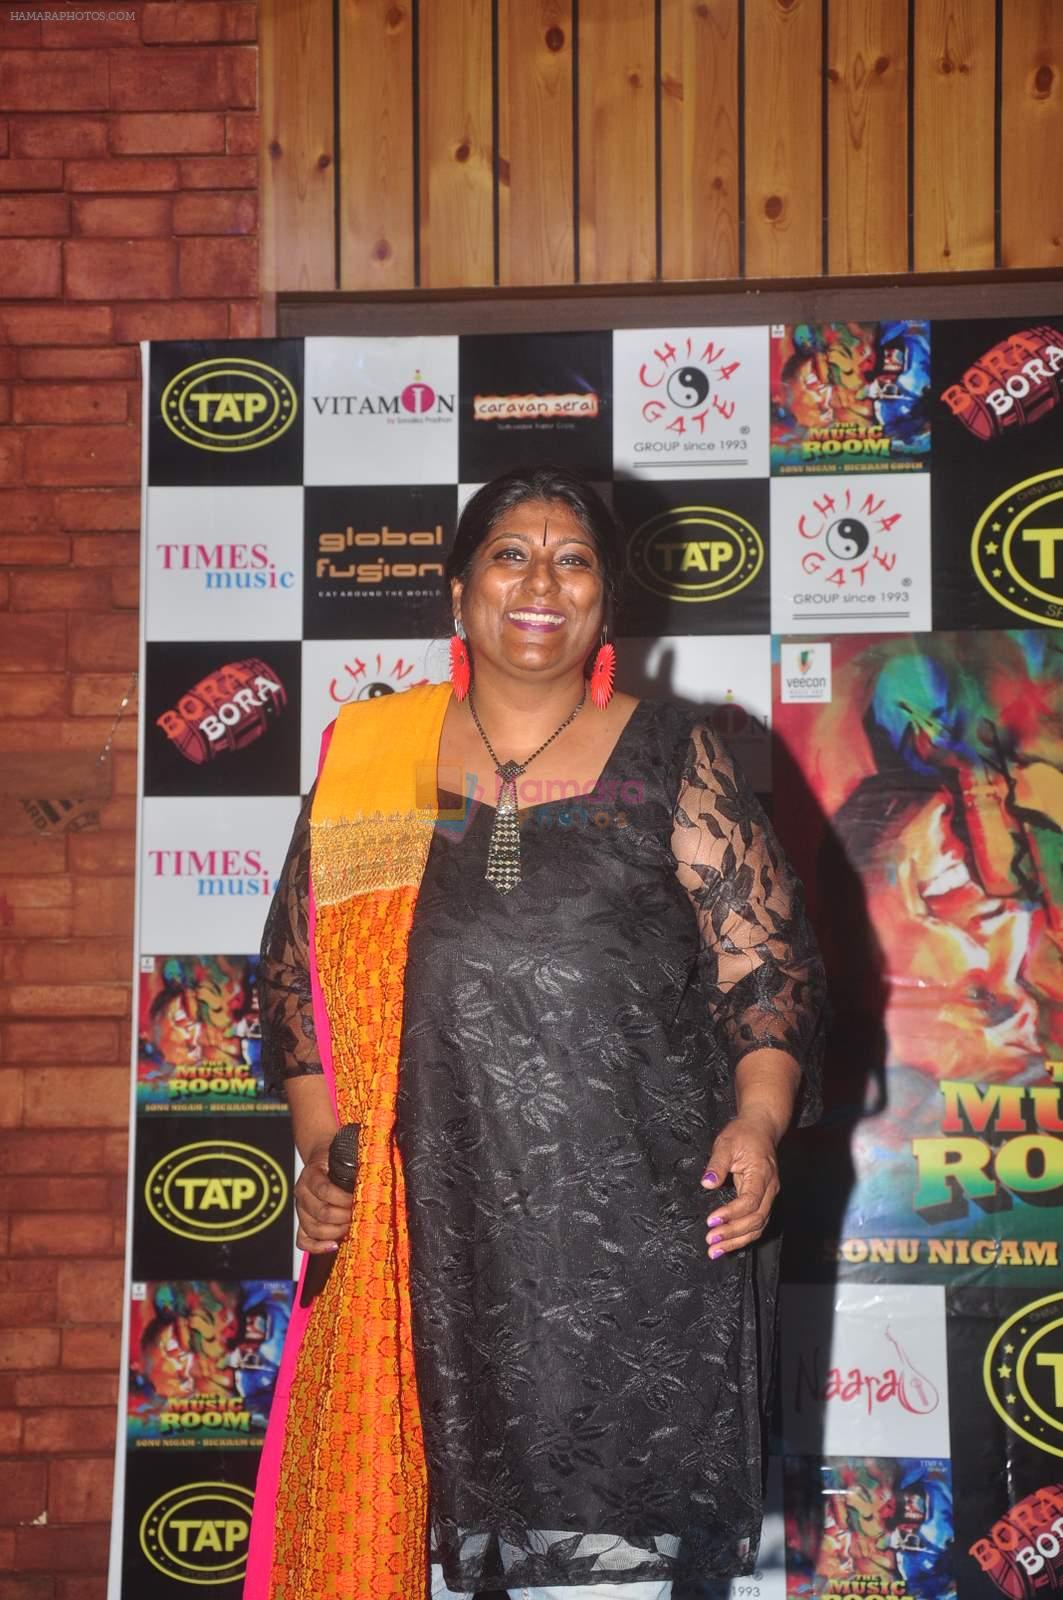 at Bickram ghosh's album launch in Tap Bar on 25th Feb 2015